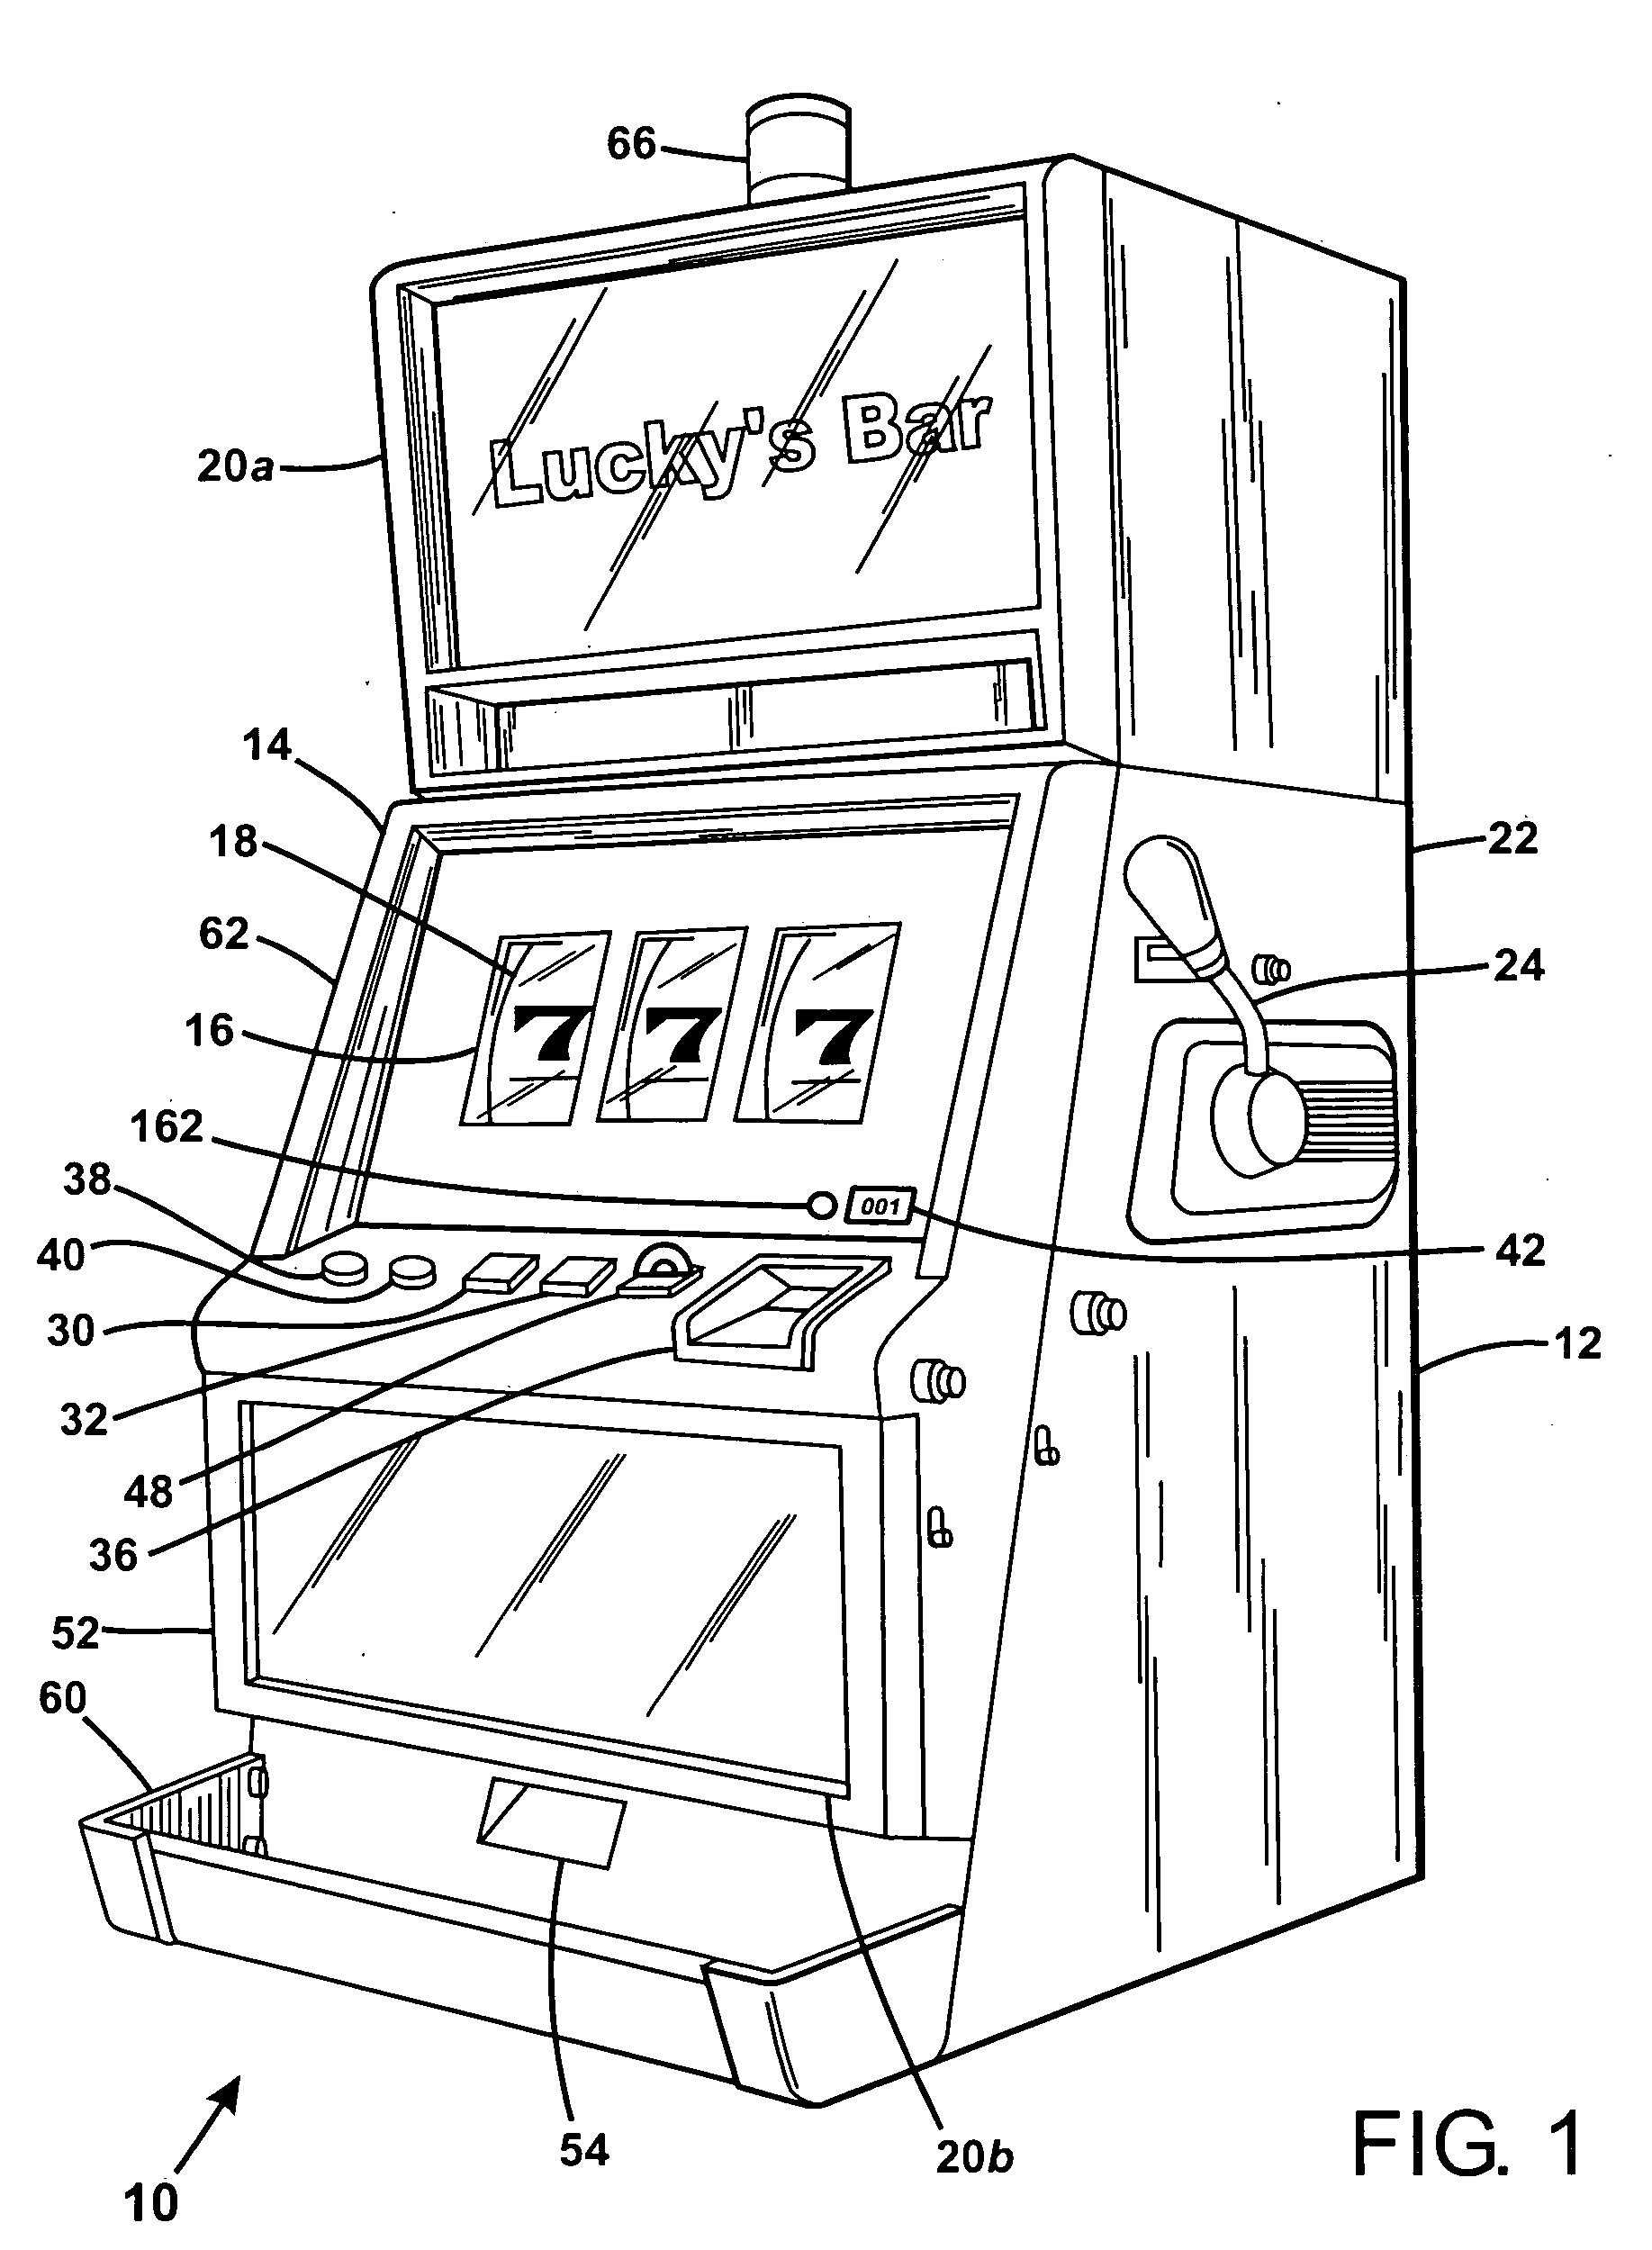 Memento dispensing device with simulated gaming features